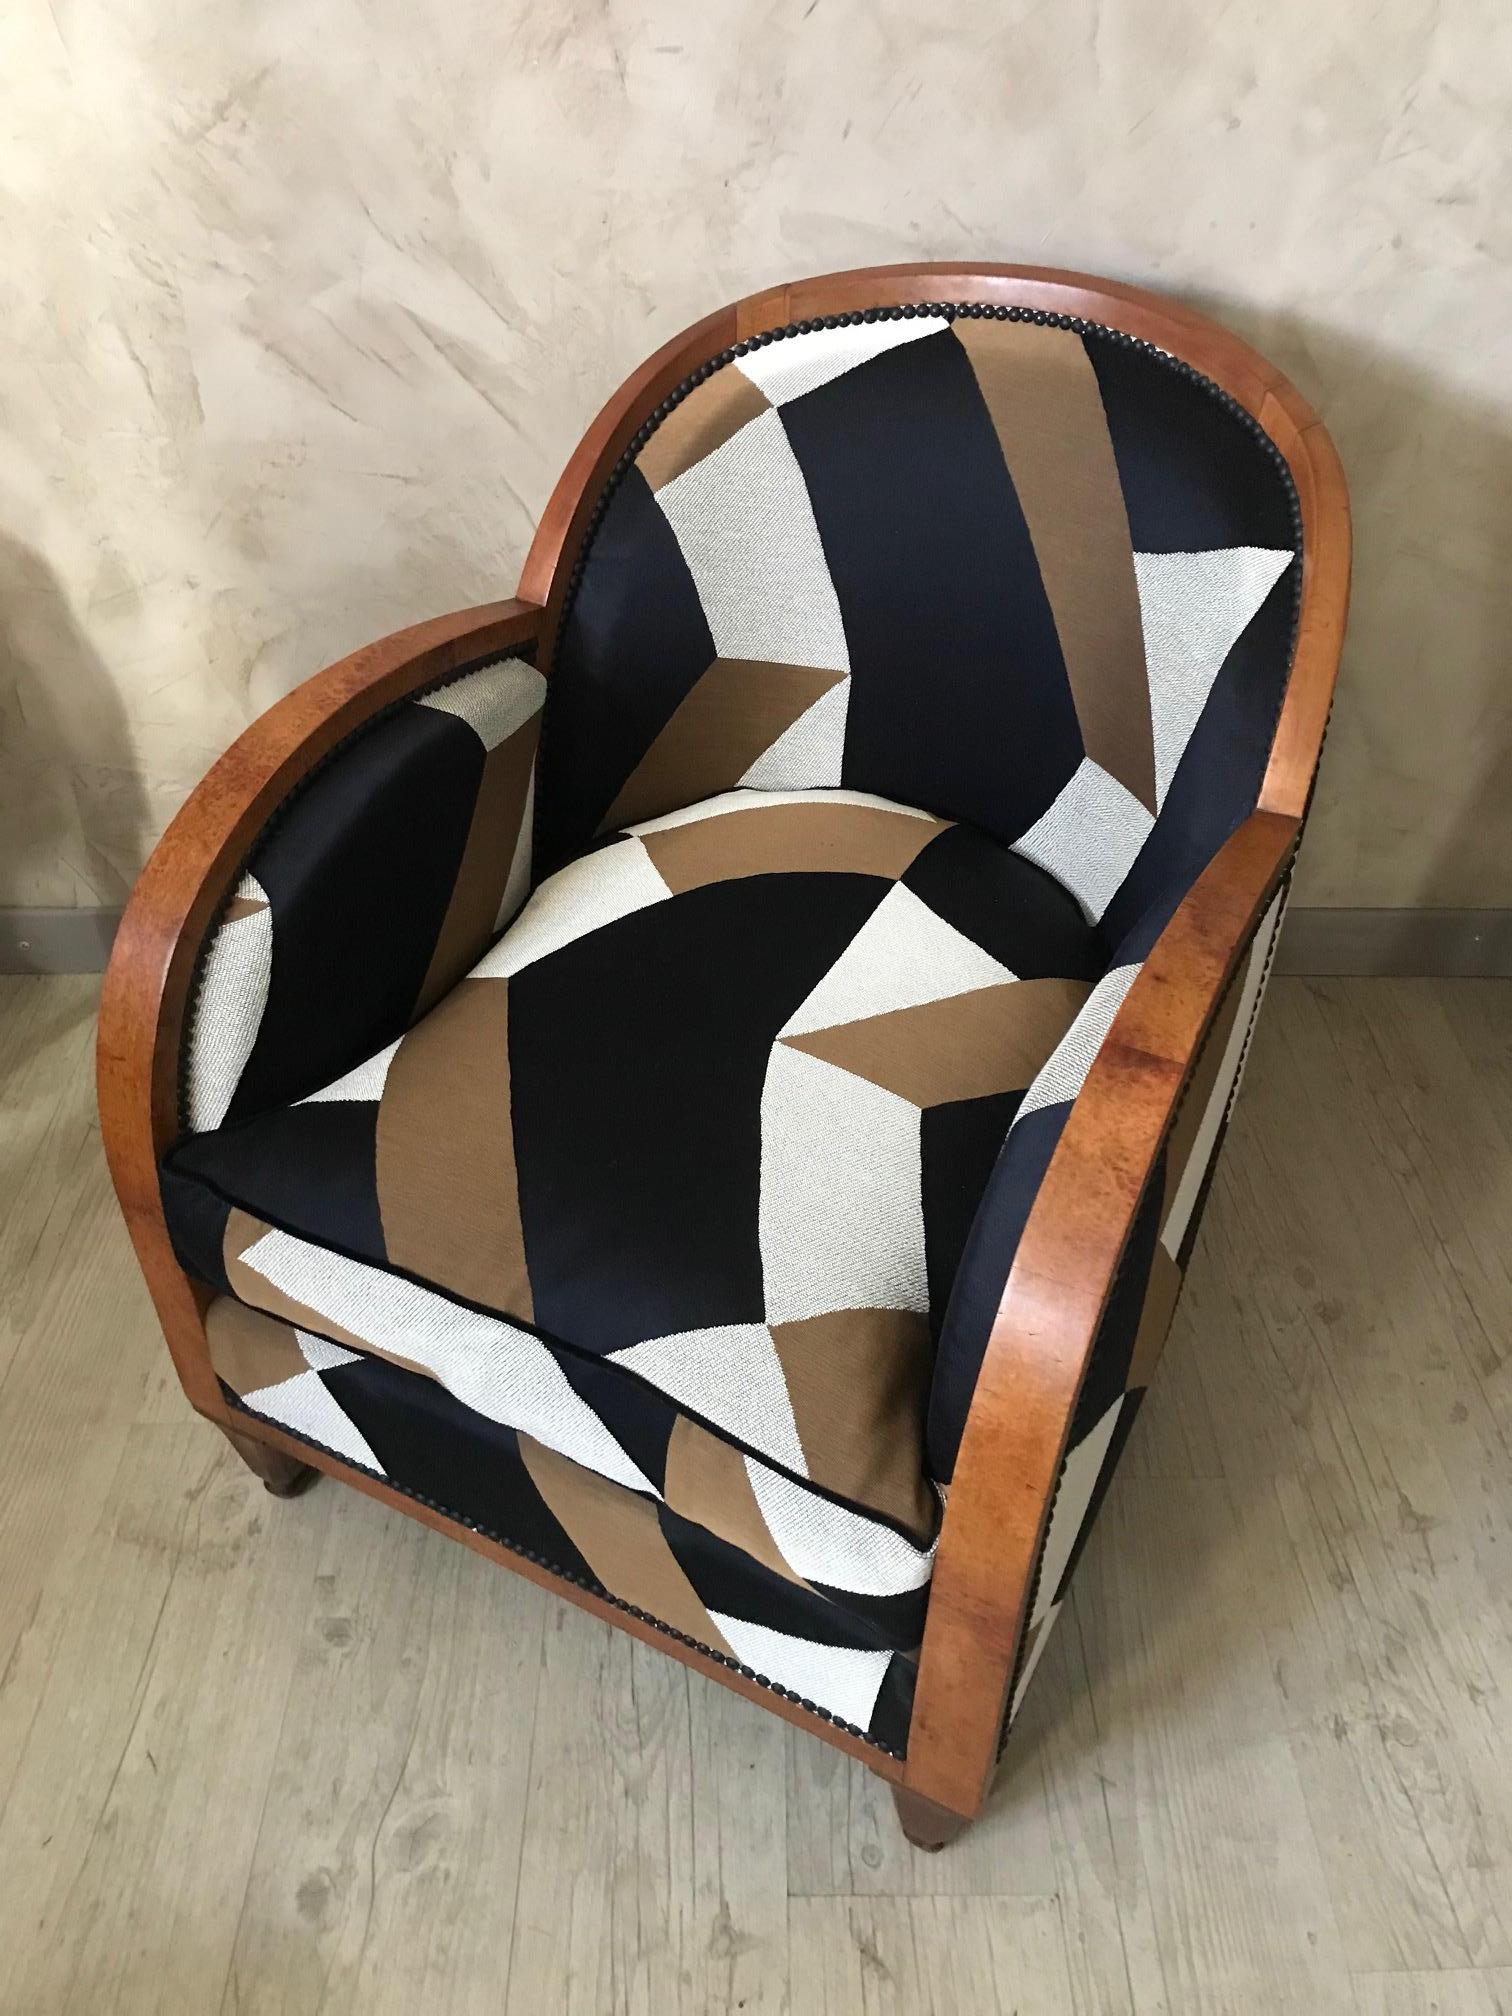 Exceptionnal 20th century walnut Art Deco armchair entirely reupholstered with a beautiful French fabric from the 